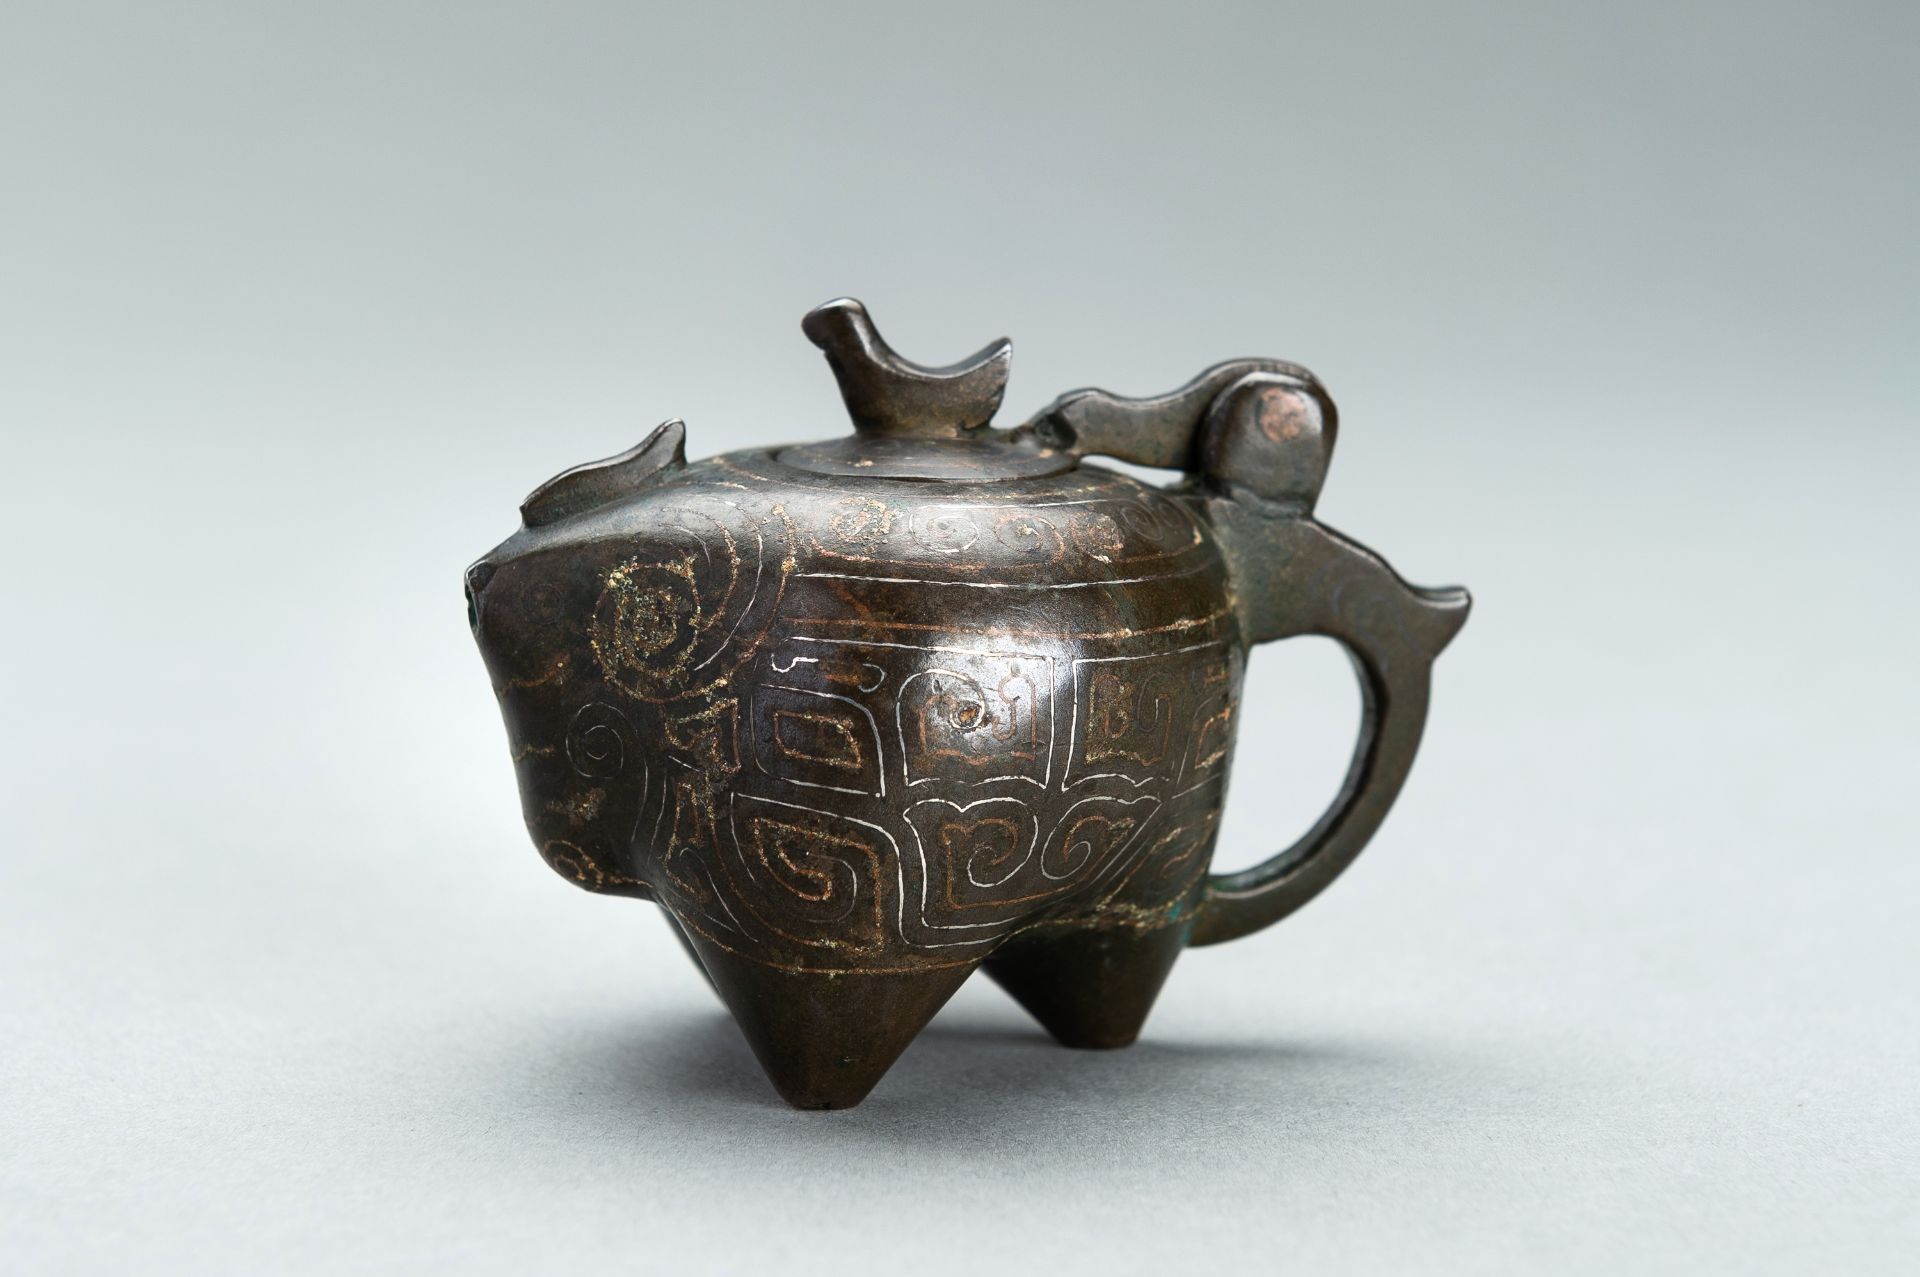 A SMALL COPPER AND SILVER INLAID BRONZE POURING TRIPOD VESSEL IN THE FORM OF AN ANIMAL, 17TH CENTURY